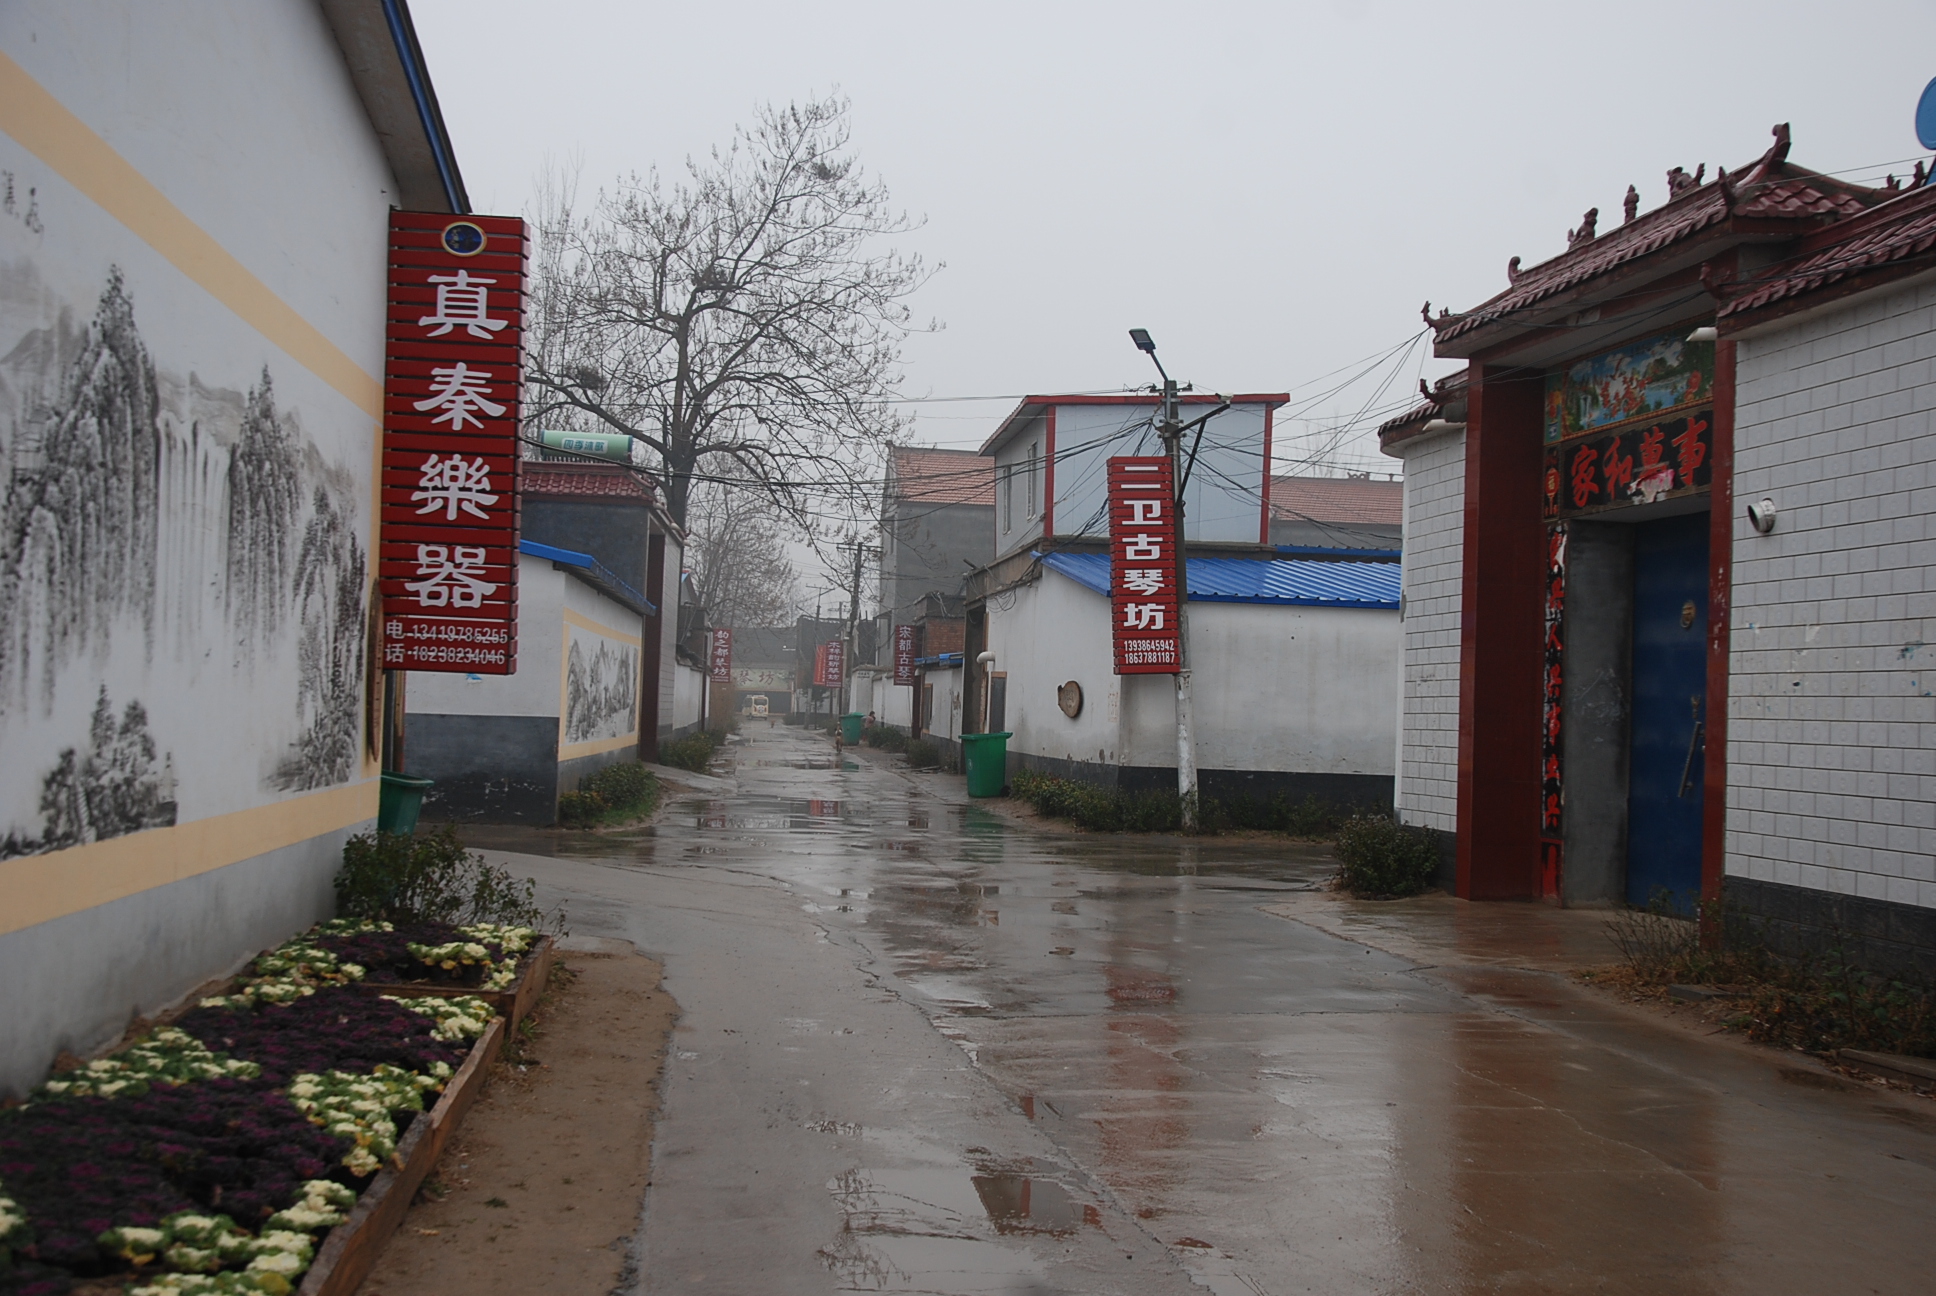 A lot of musical instrument stores around the neighborhoods within the Xuchang Village [Photo: China Plus]